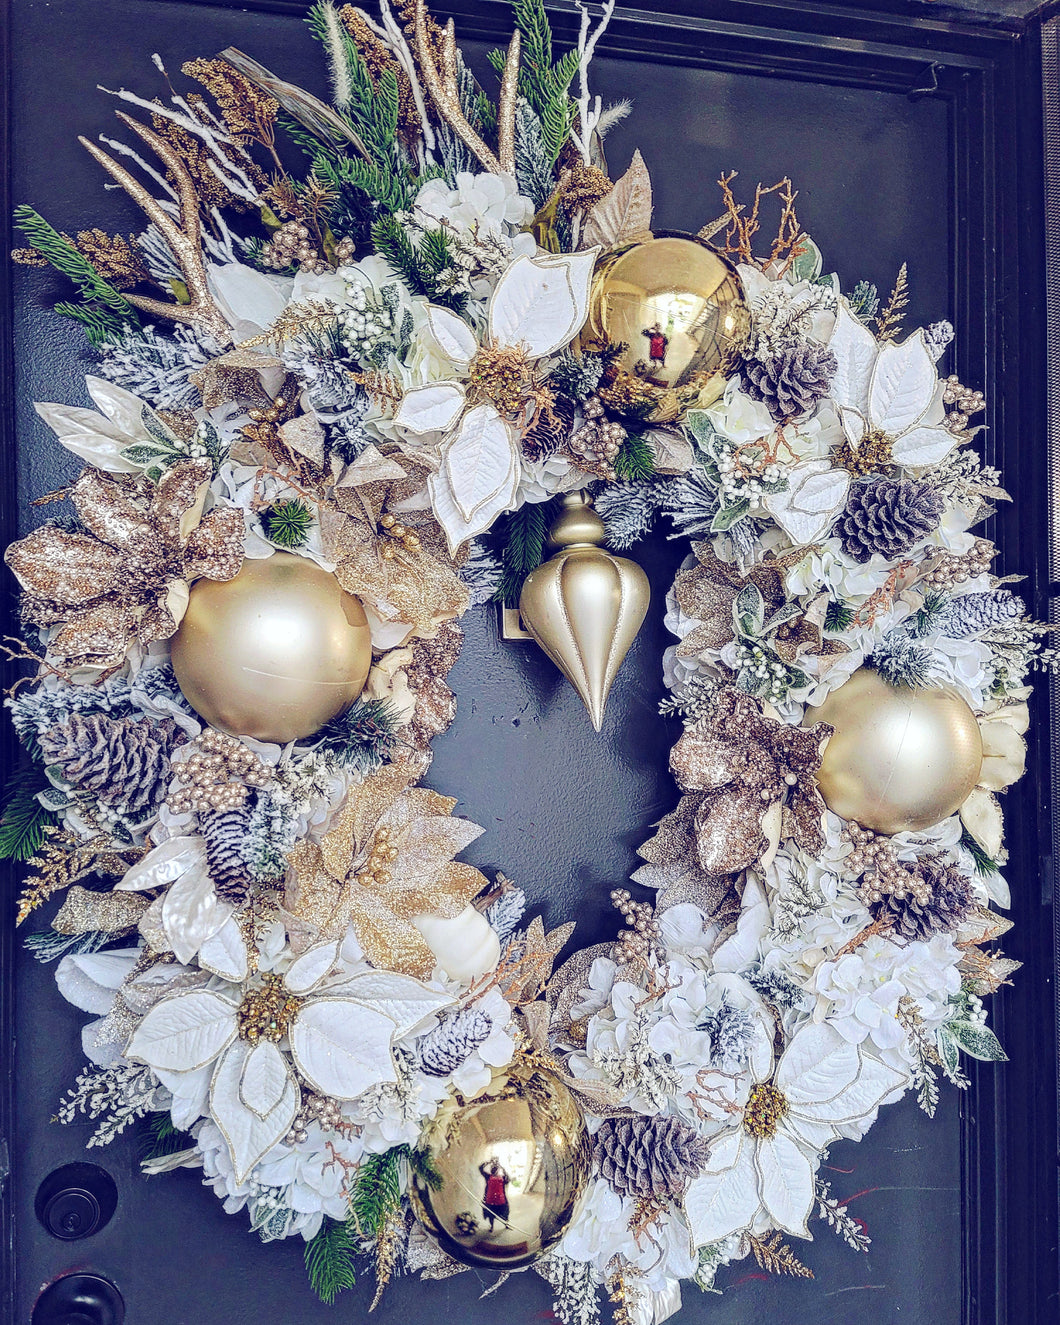 The Rustic Vintage Glam (Full) Fantasy Wreath (Limited Edition)